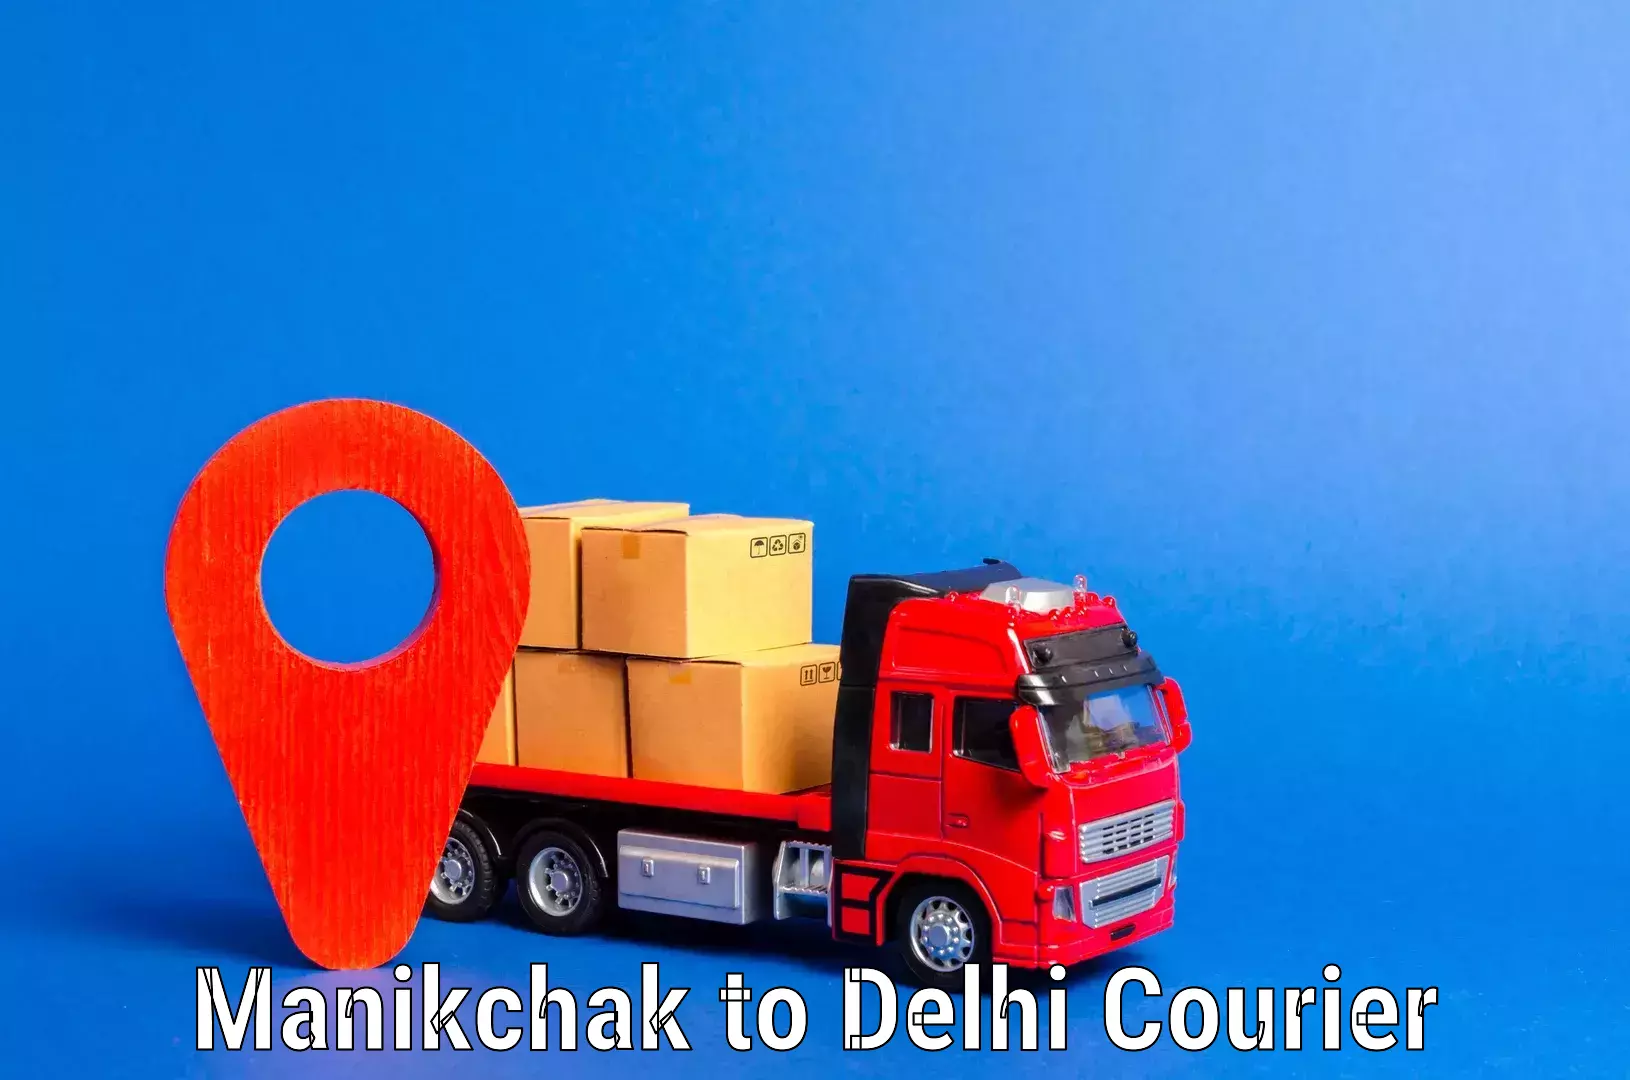 Trusted relocation experts Manikchak to Delhi